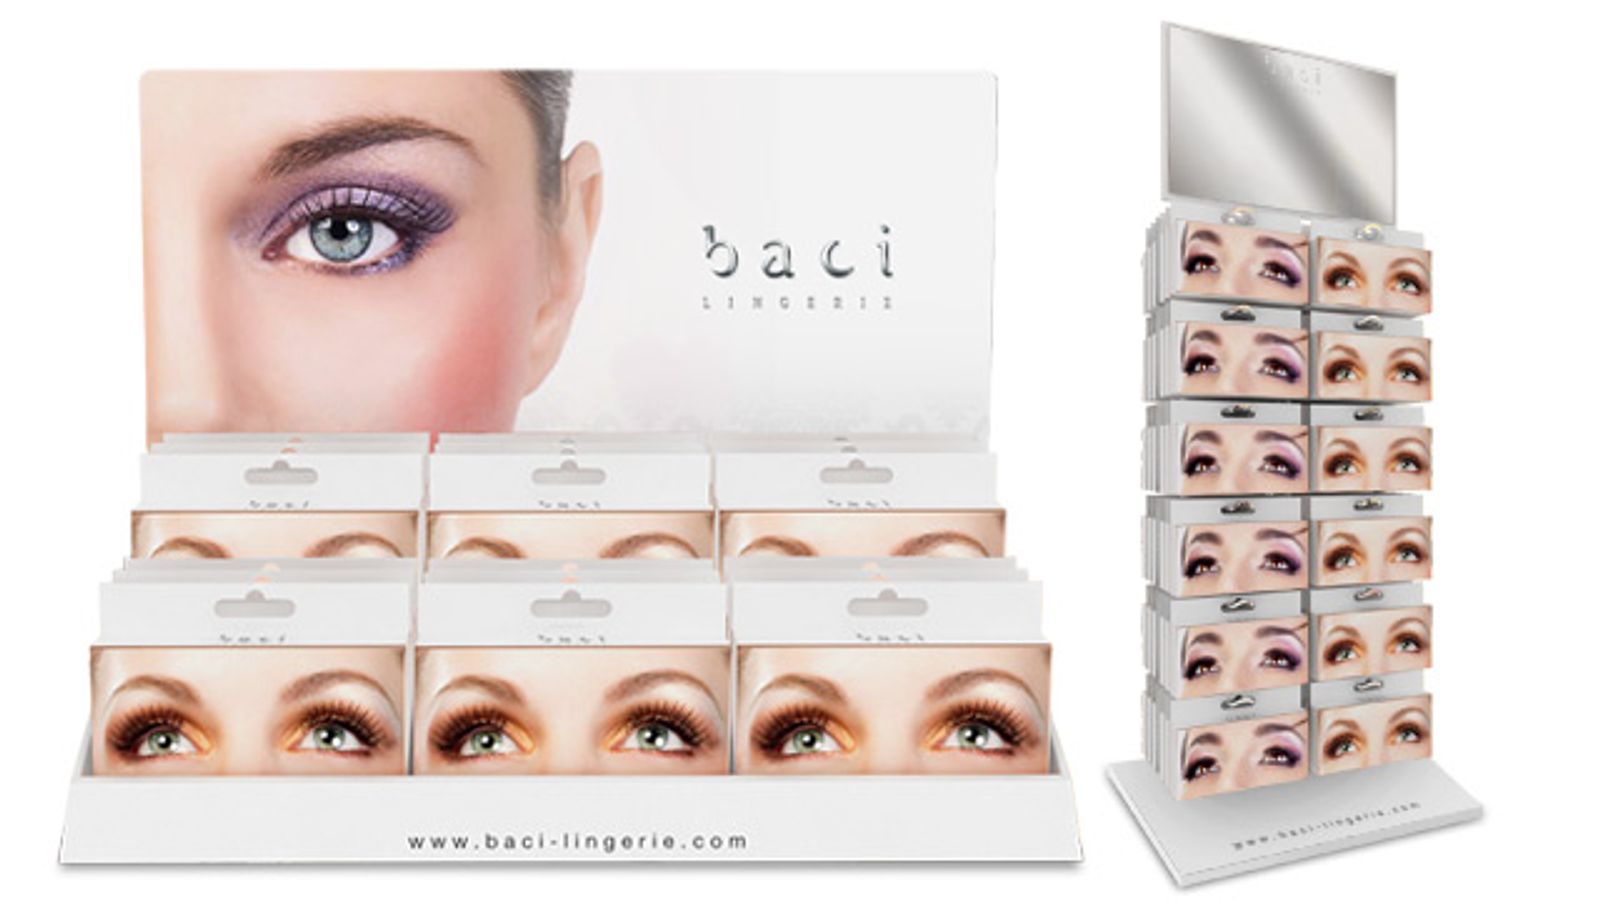 Baci Lingerie's Lashes Collection Gaining Momentum in U.S.